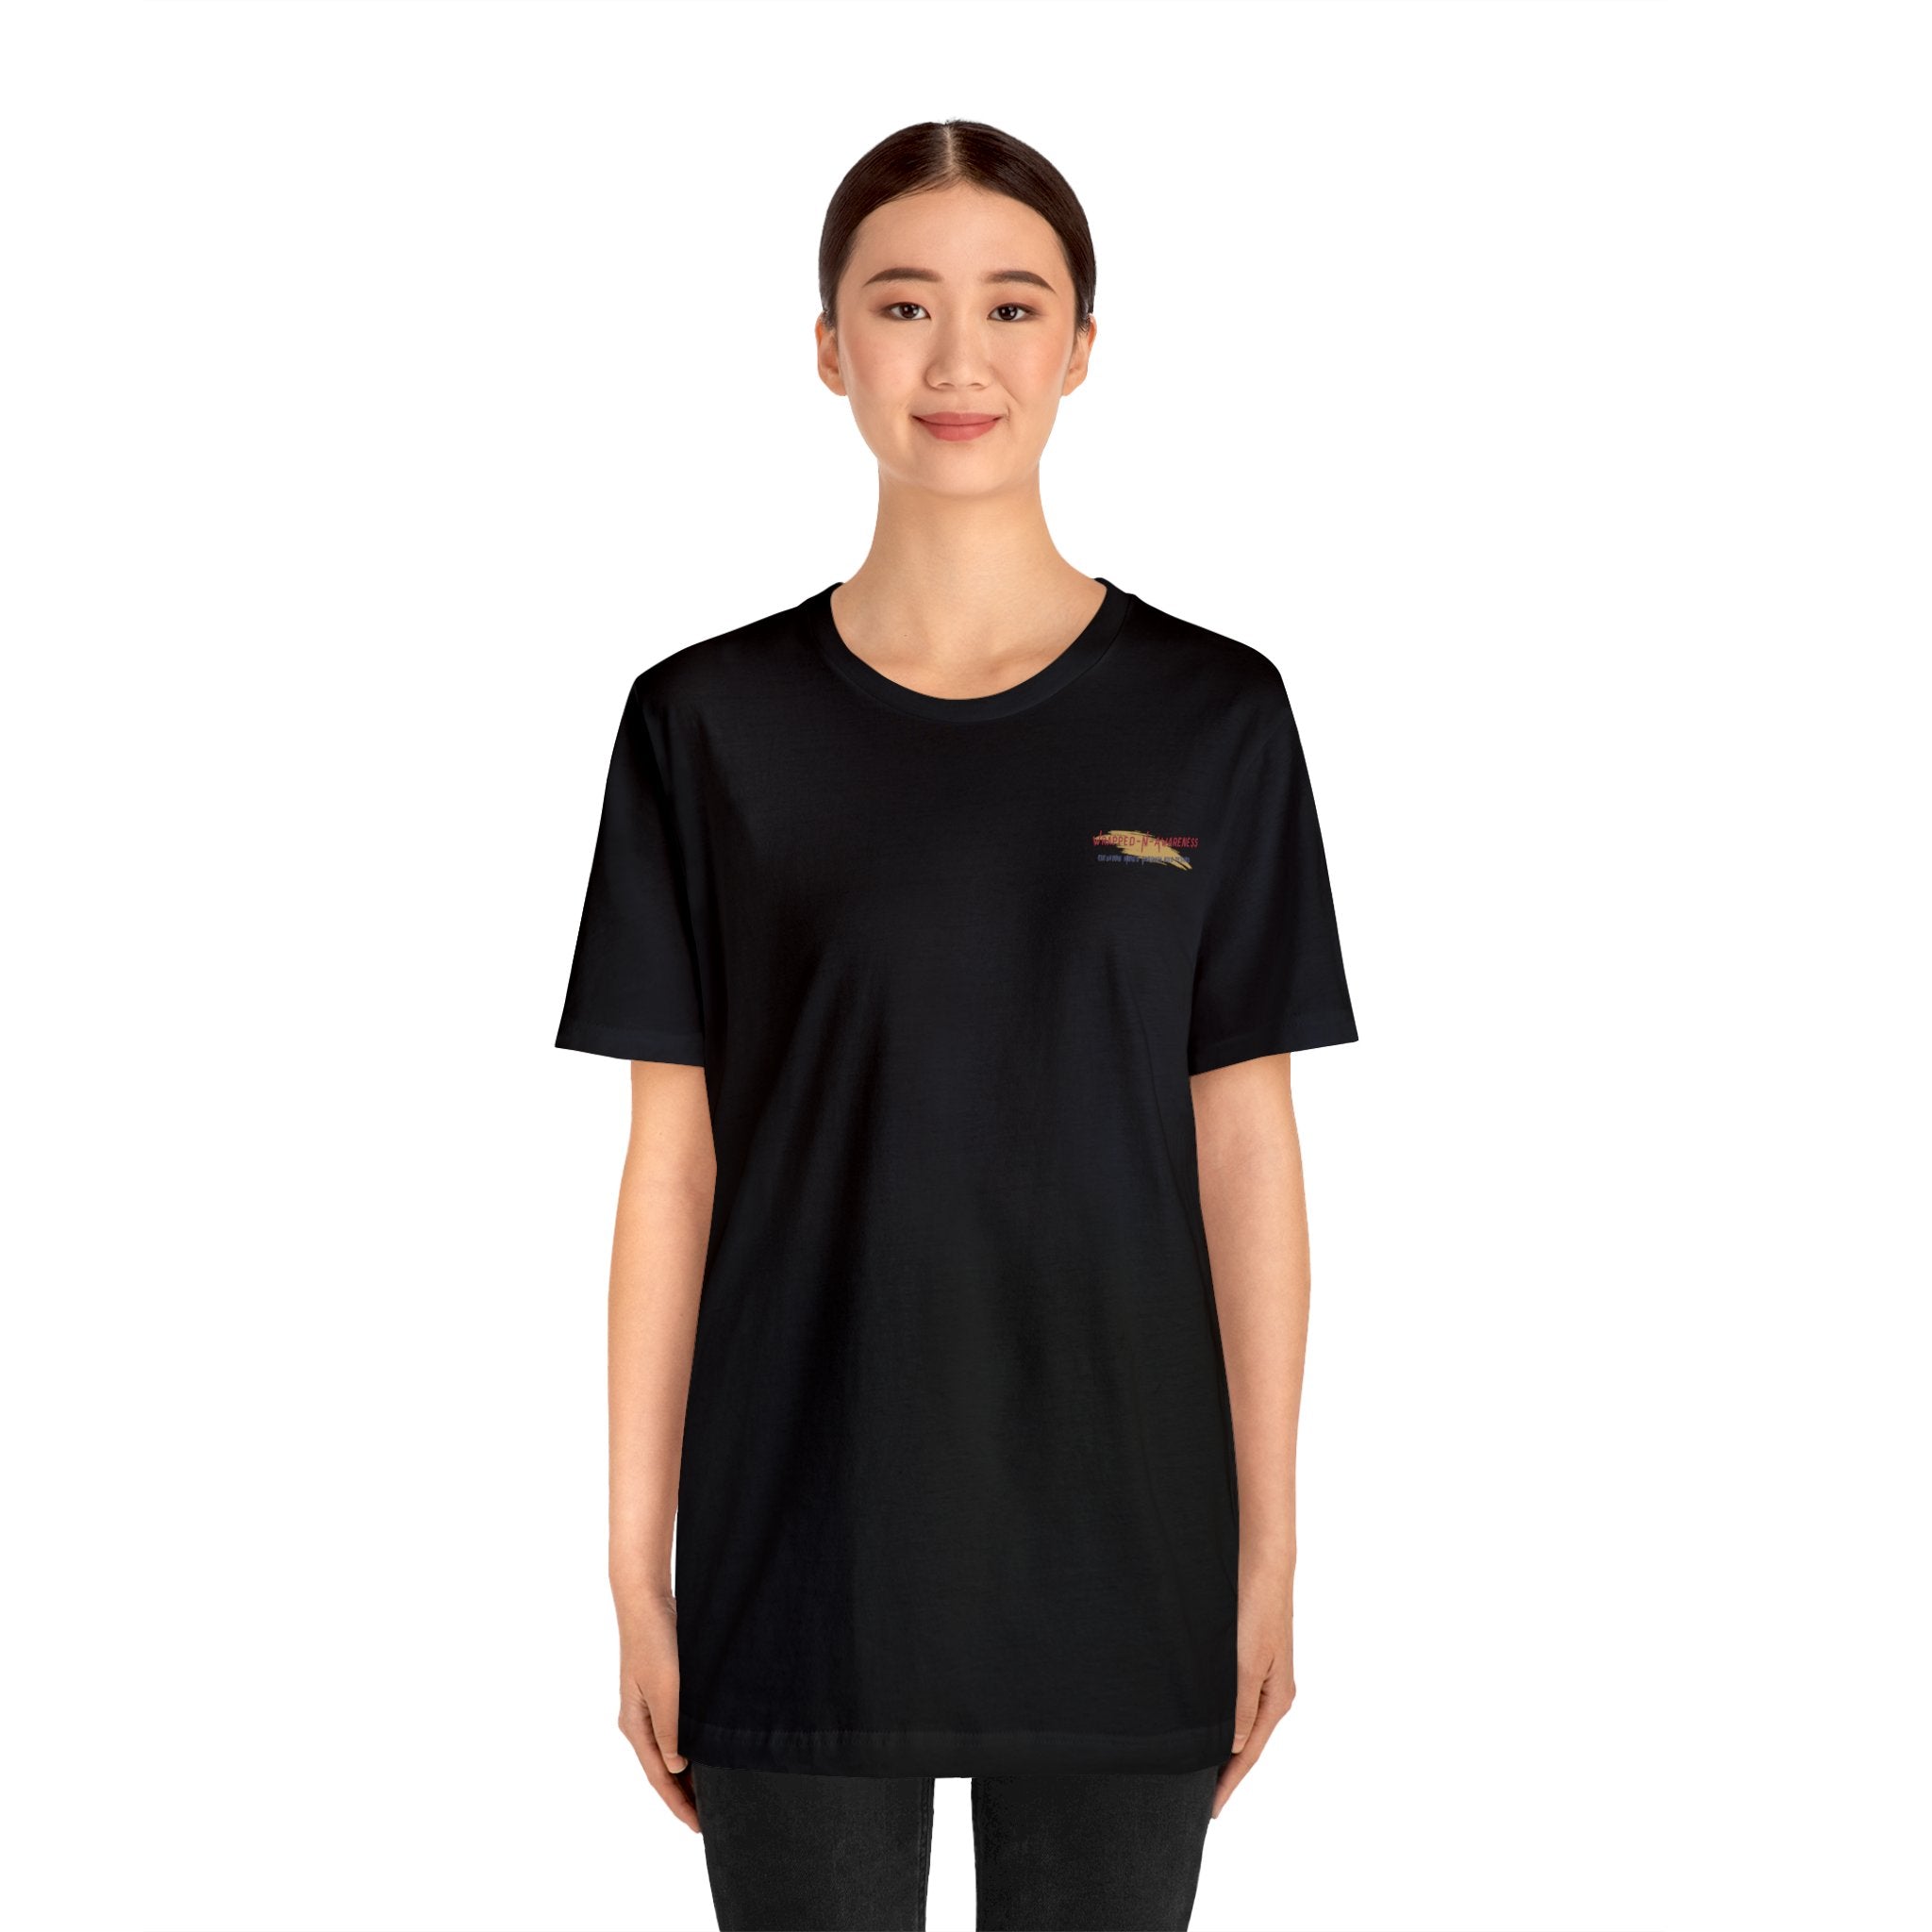 Progress Over Perfection Tee - Bella+Canvas 3001 Yellow Airlume Cotton Bella+Canvas 3001 Crew Neckline Jersey Short Sleeve Lightweight Fabric Mental Health Support Retail Fit Tear-away Label Tee Unisex Tee T-Shirt 3213070338109514971_2048 Printify